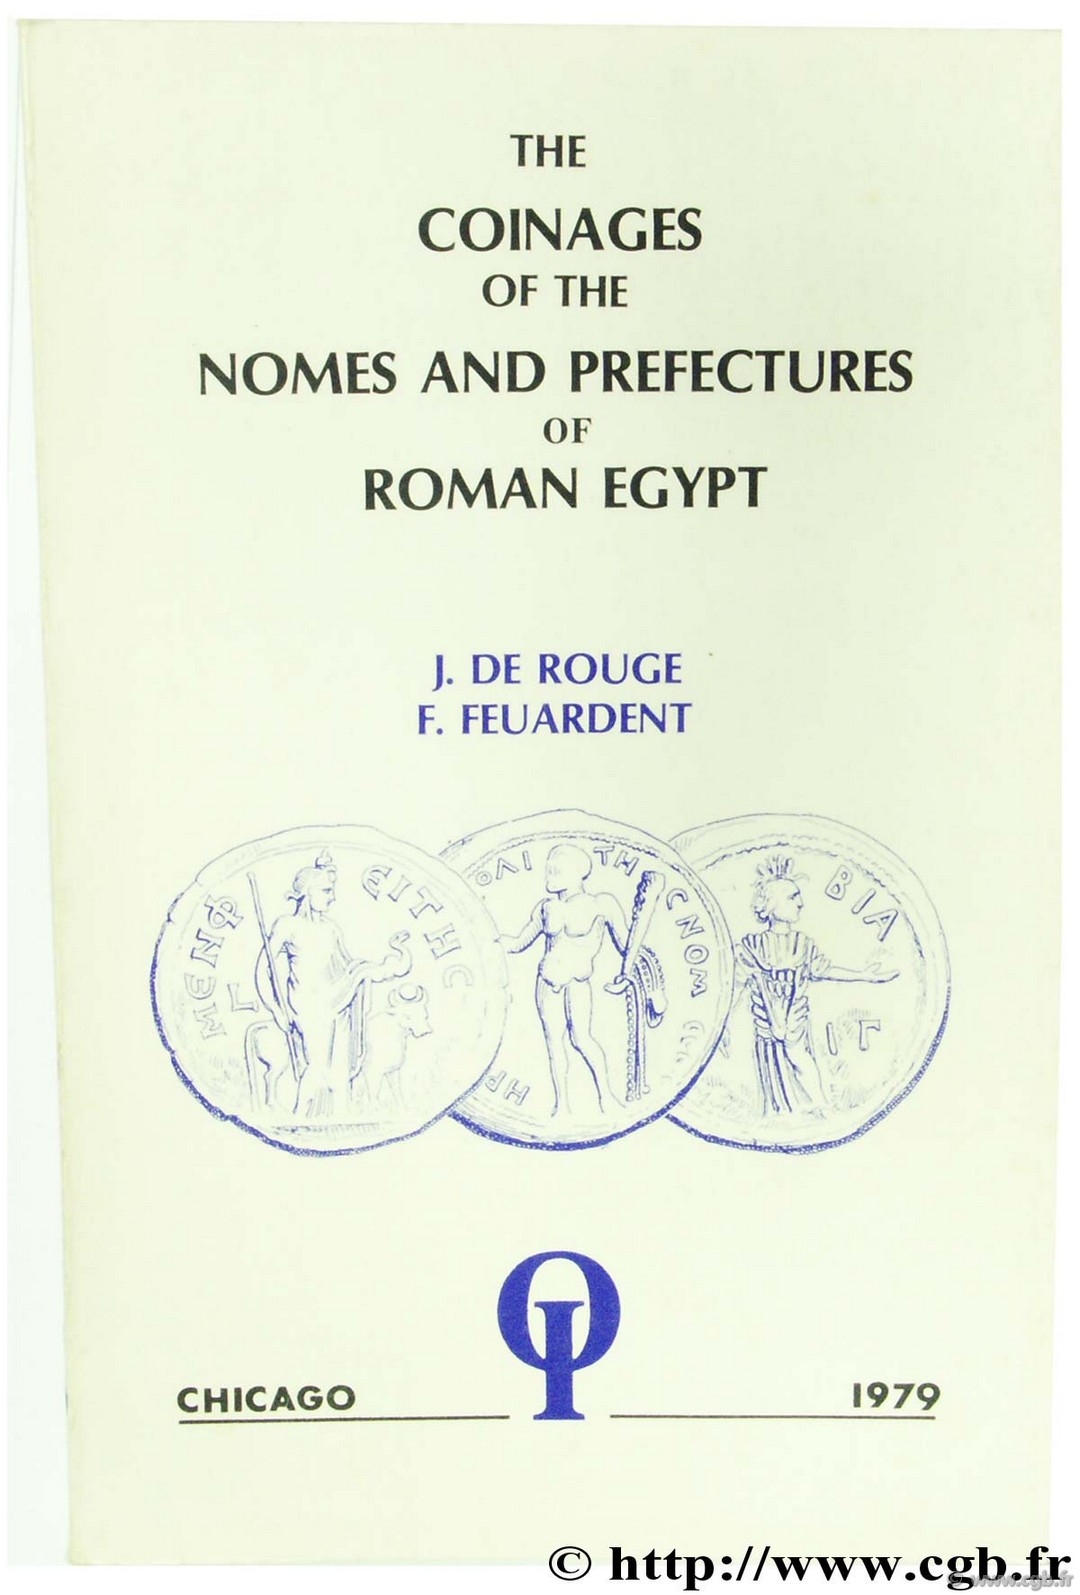 The Coinage of the Nomes and Prefectures of Roman Egypt DE ROUGE J., FEUARDENT F.